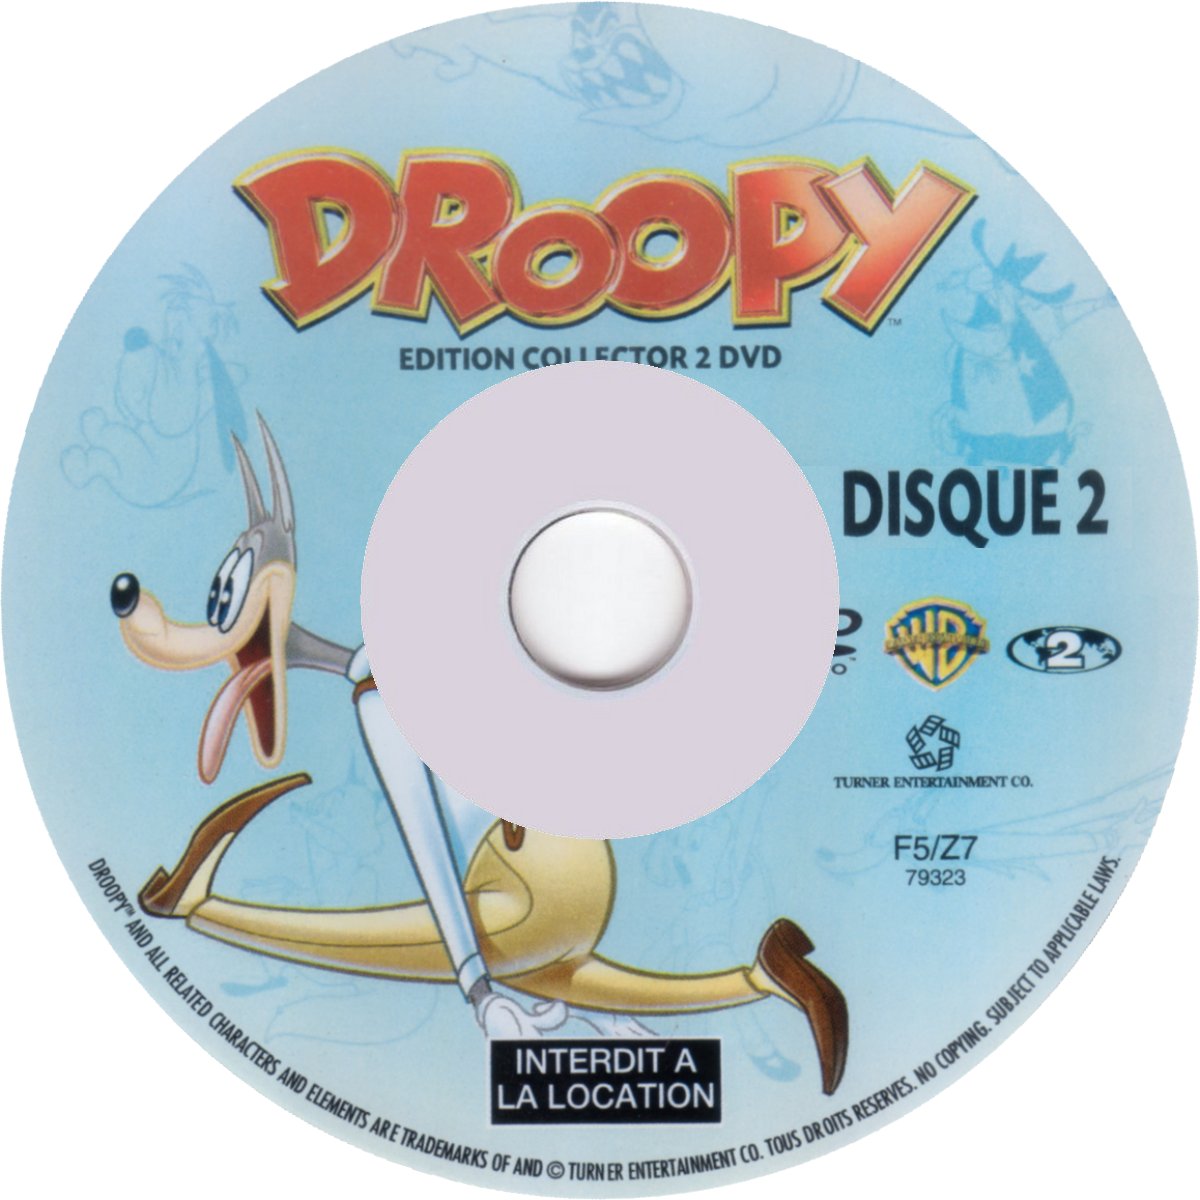 Droopy DVD 2